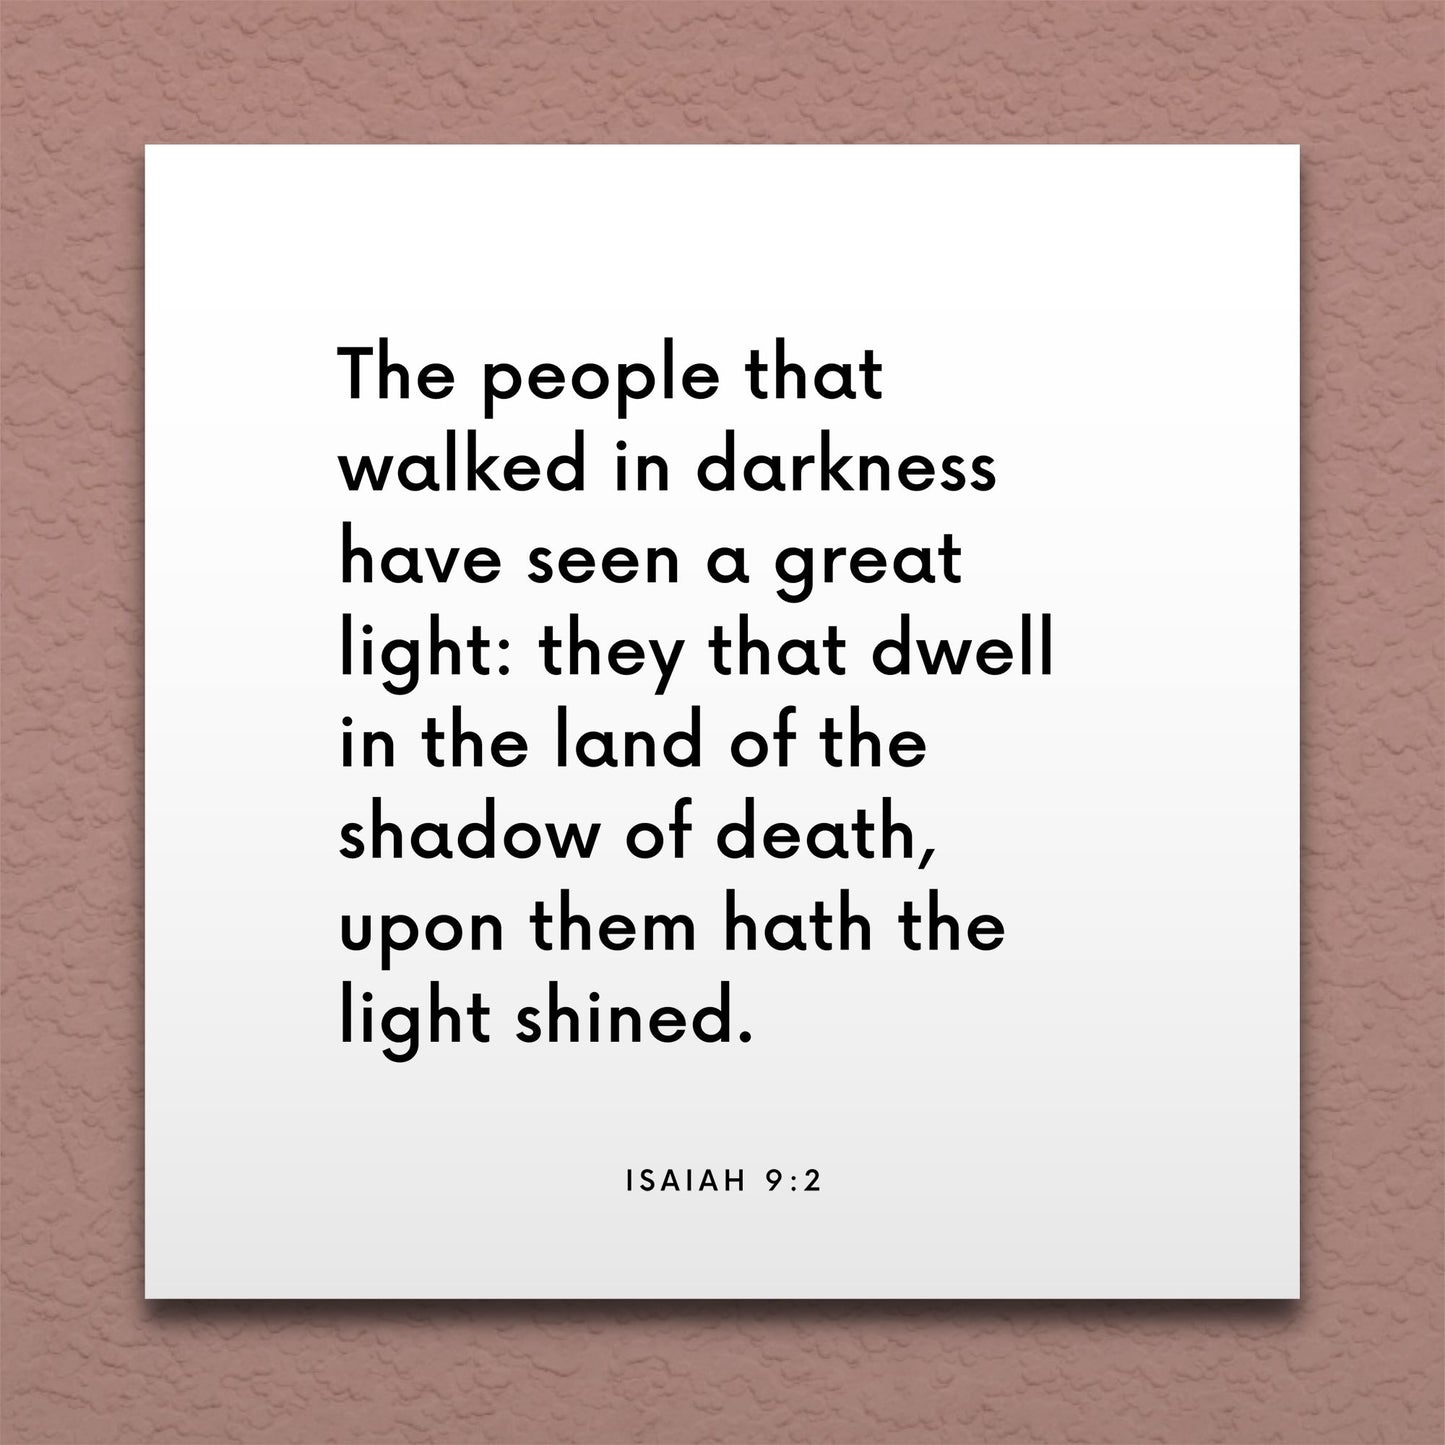 Wall-mounted scripture tile for Isaiah 9:2 - "The people that walked in darkness have seen a great light"